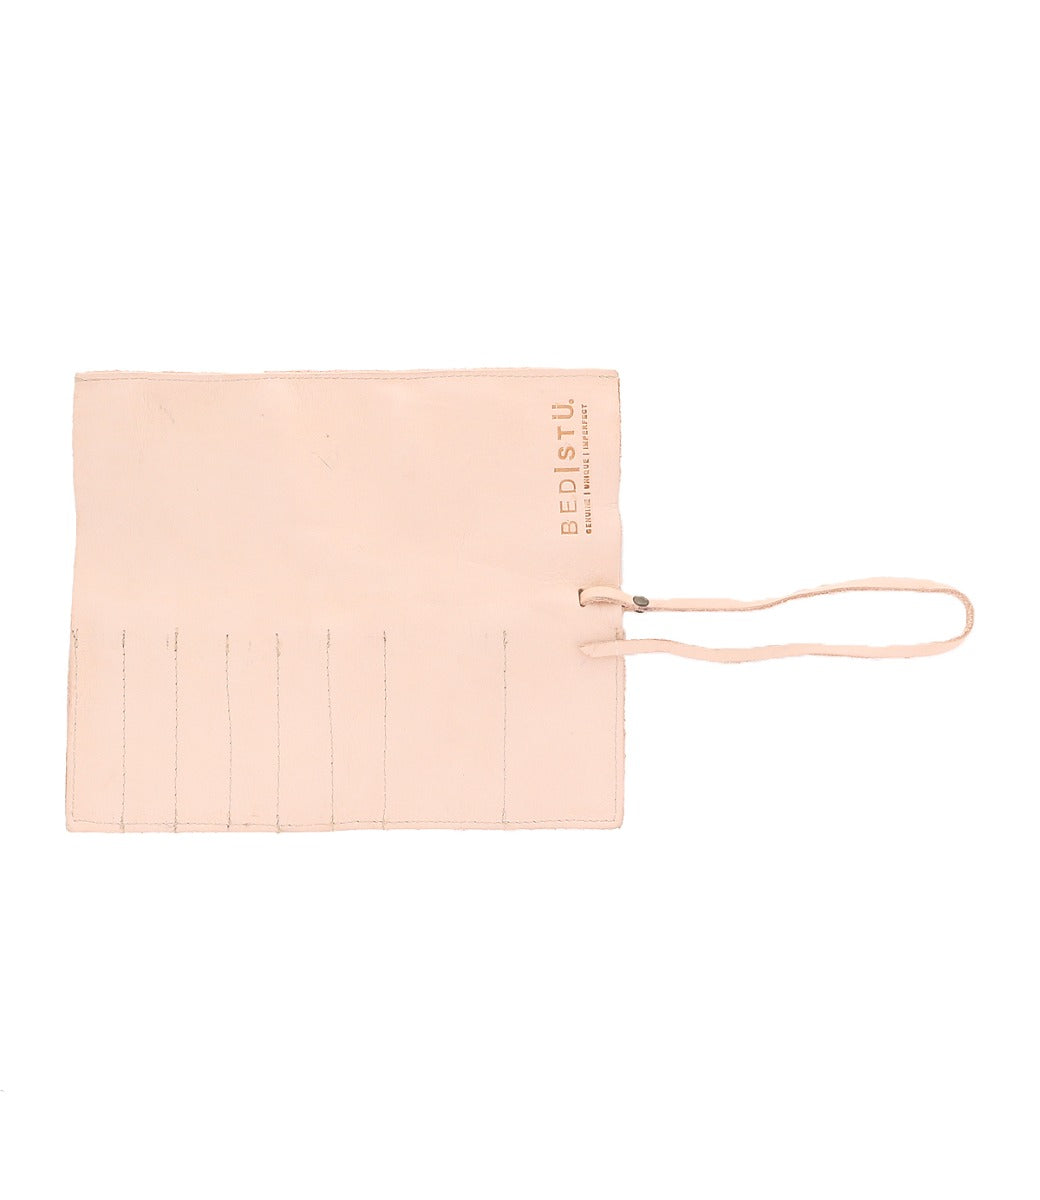 A Prepped by Bed Stu pink leather pouch with a zipper on it.